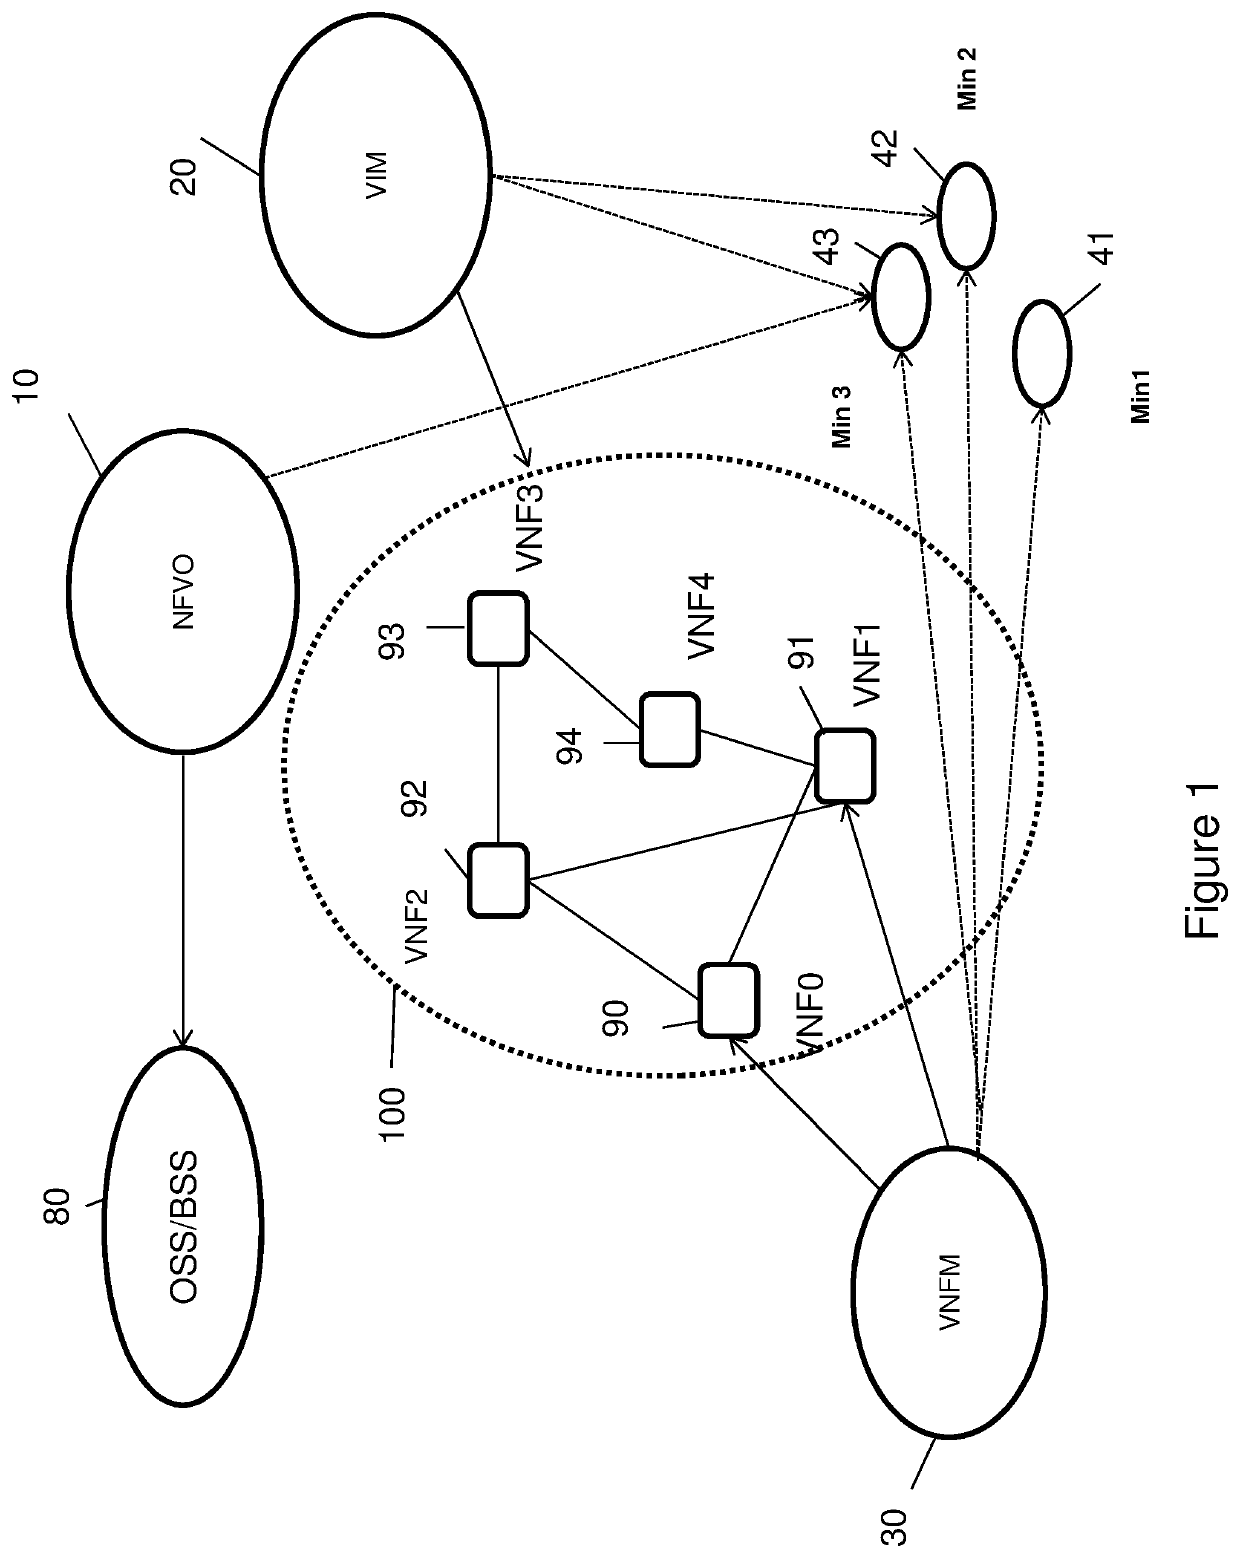 Method for auditing a virtualised resource deployed in a cloud computing network